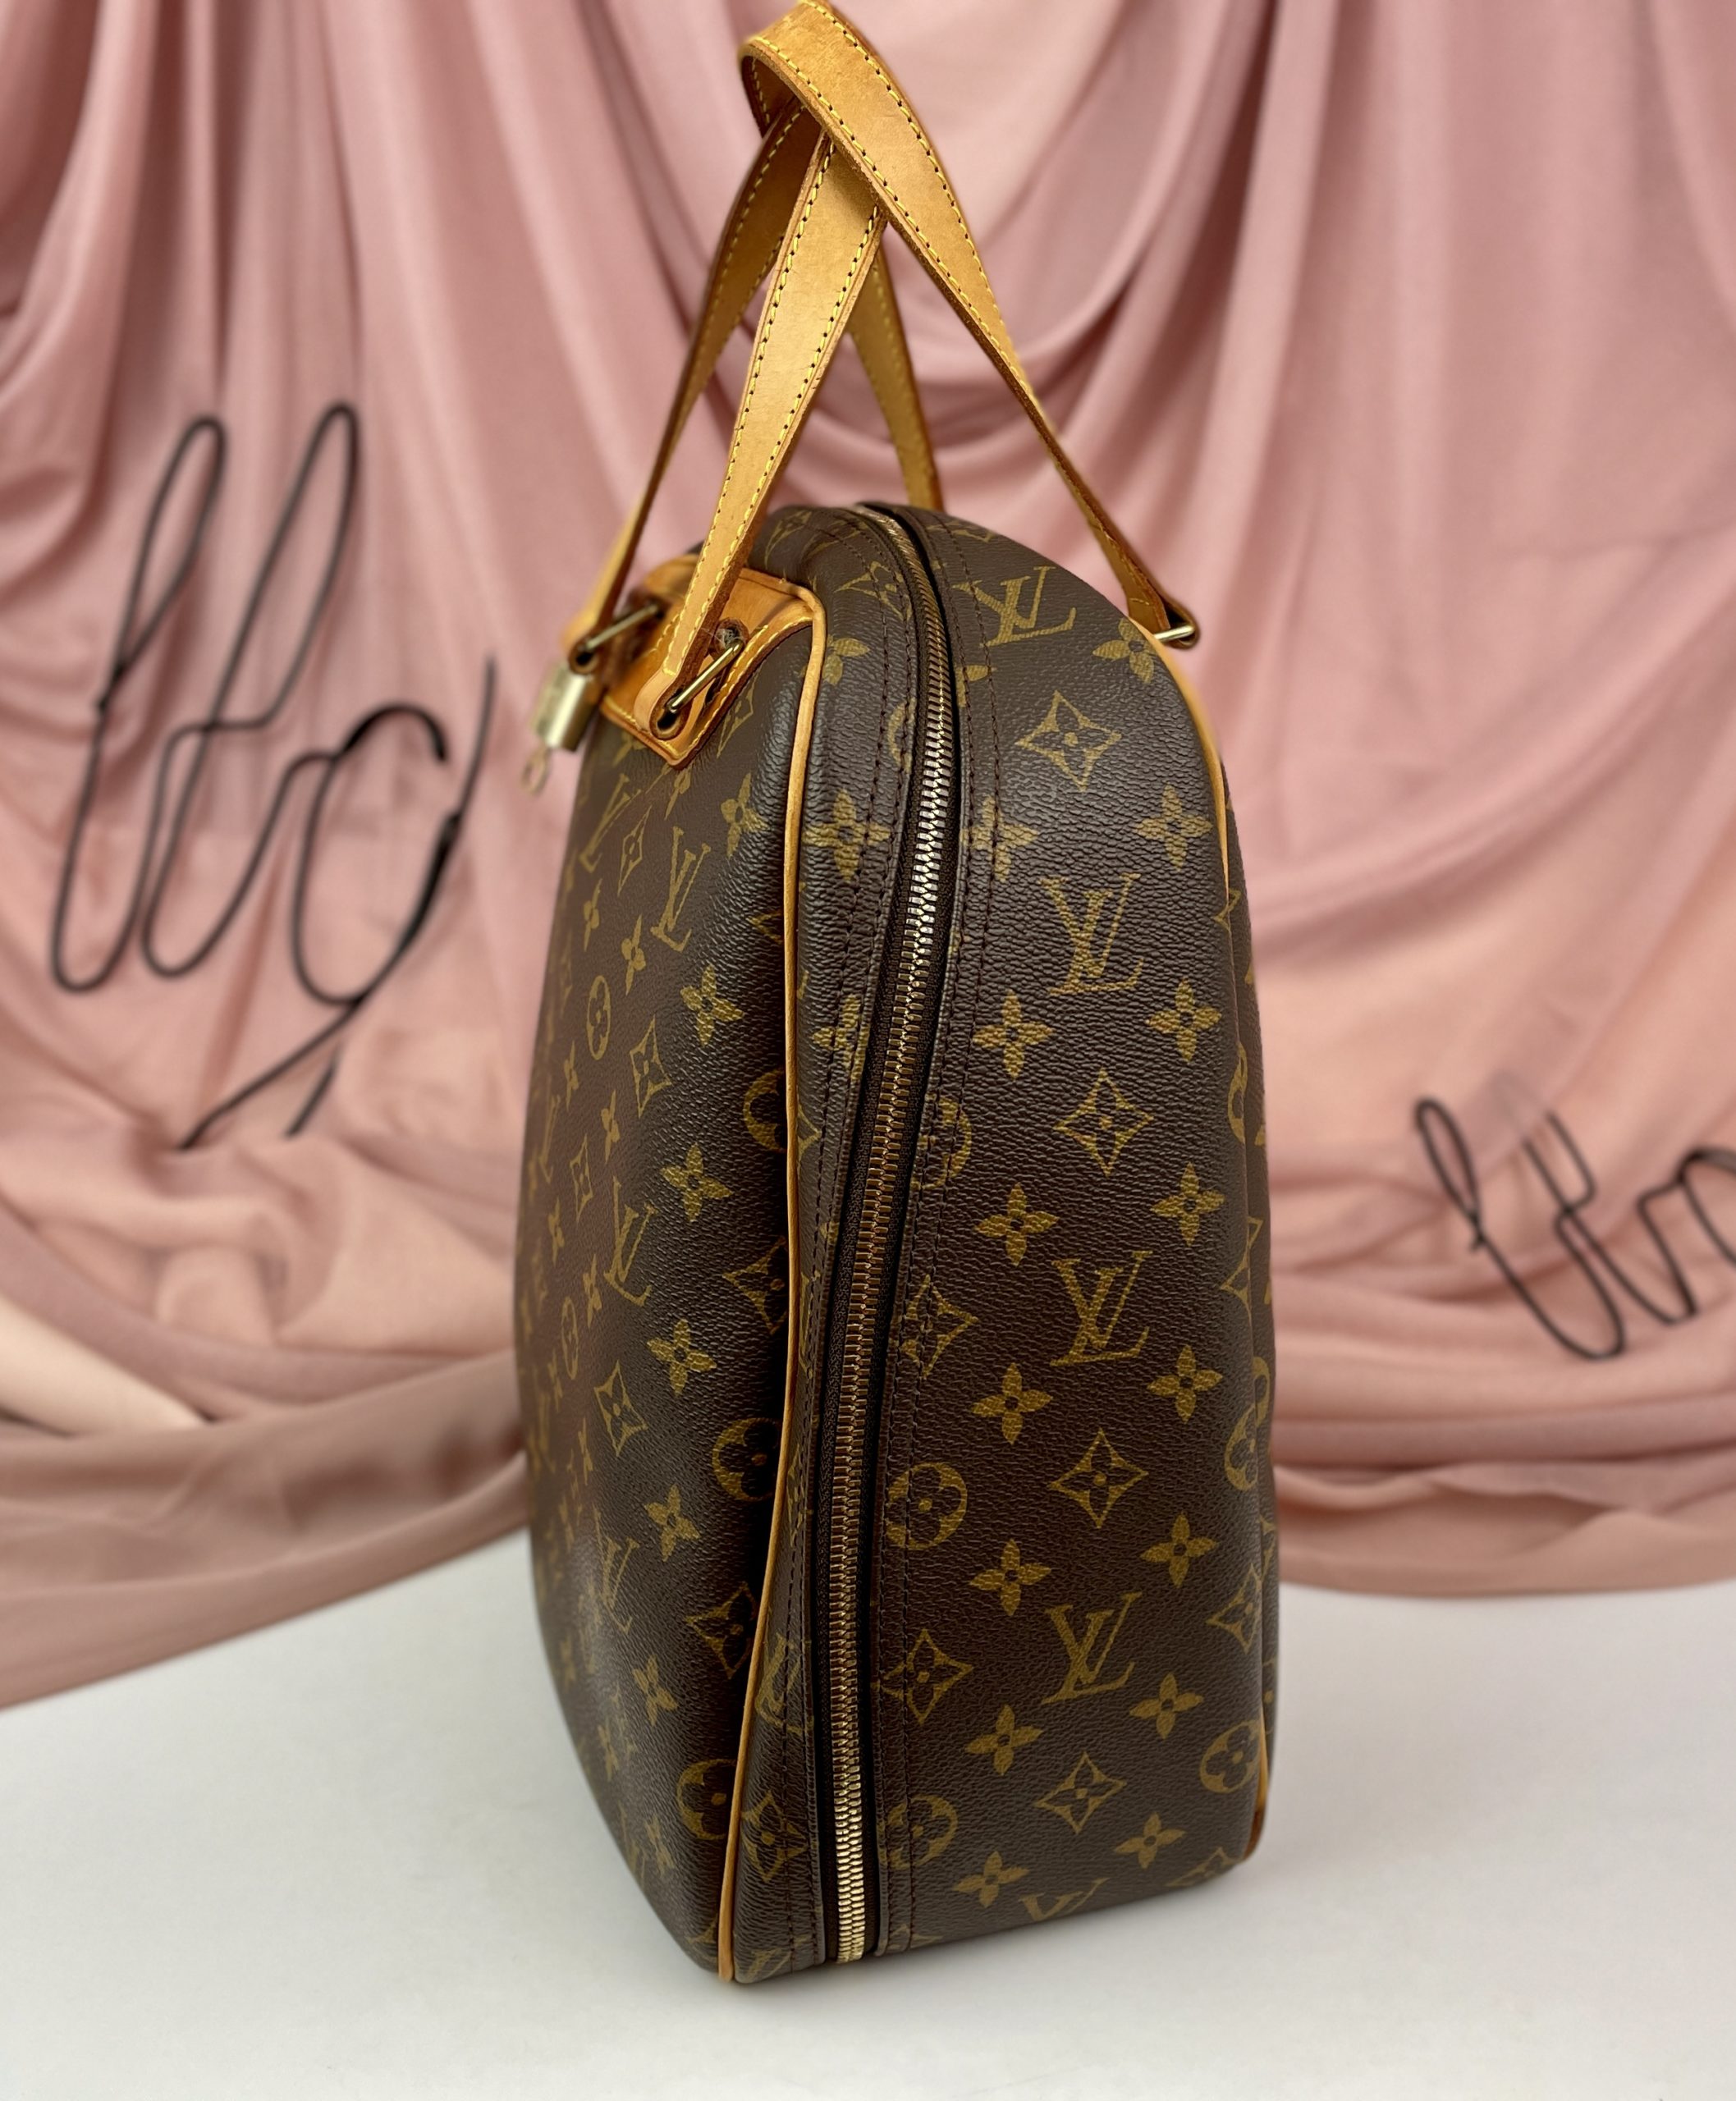 Women's Handbags - Used & Pre-Owned - Clothes Mentor – tagged BRAND: LOUIS  VUITTON